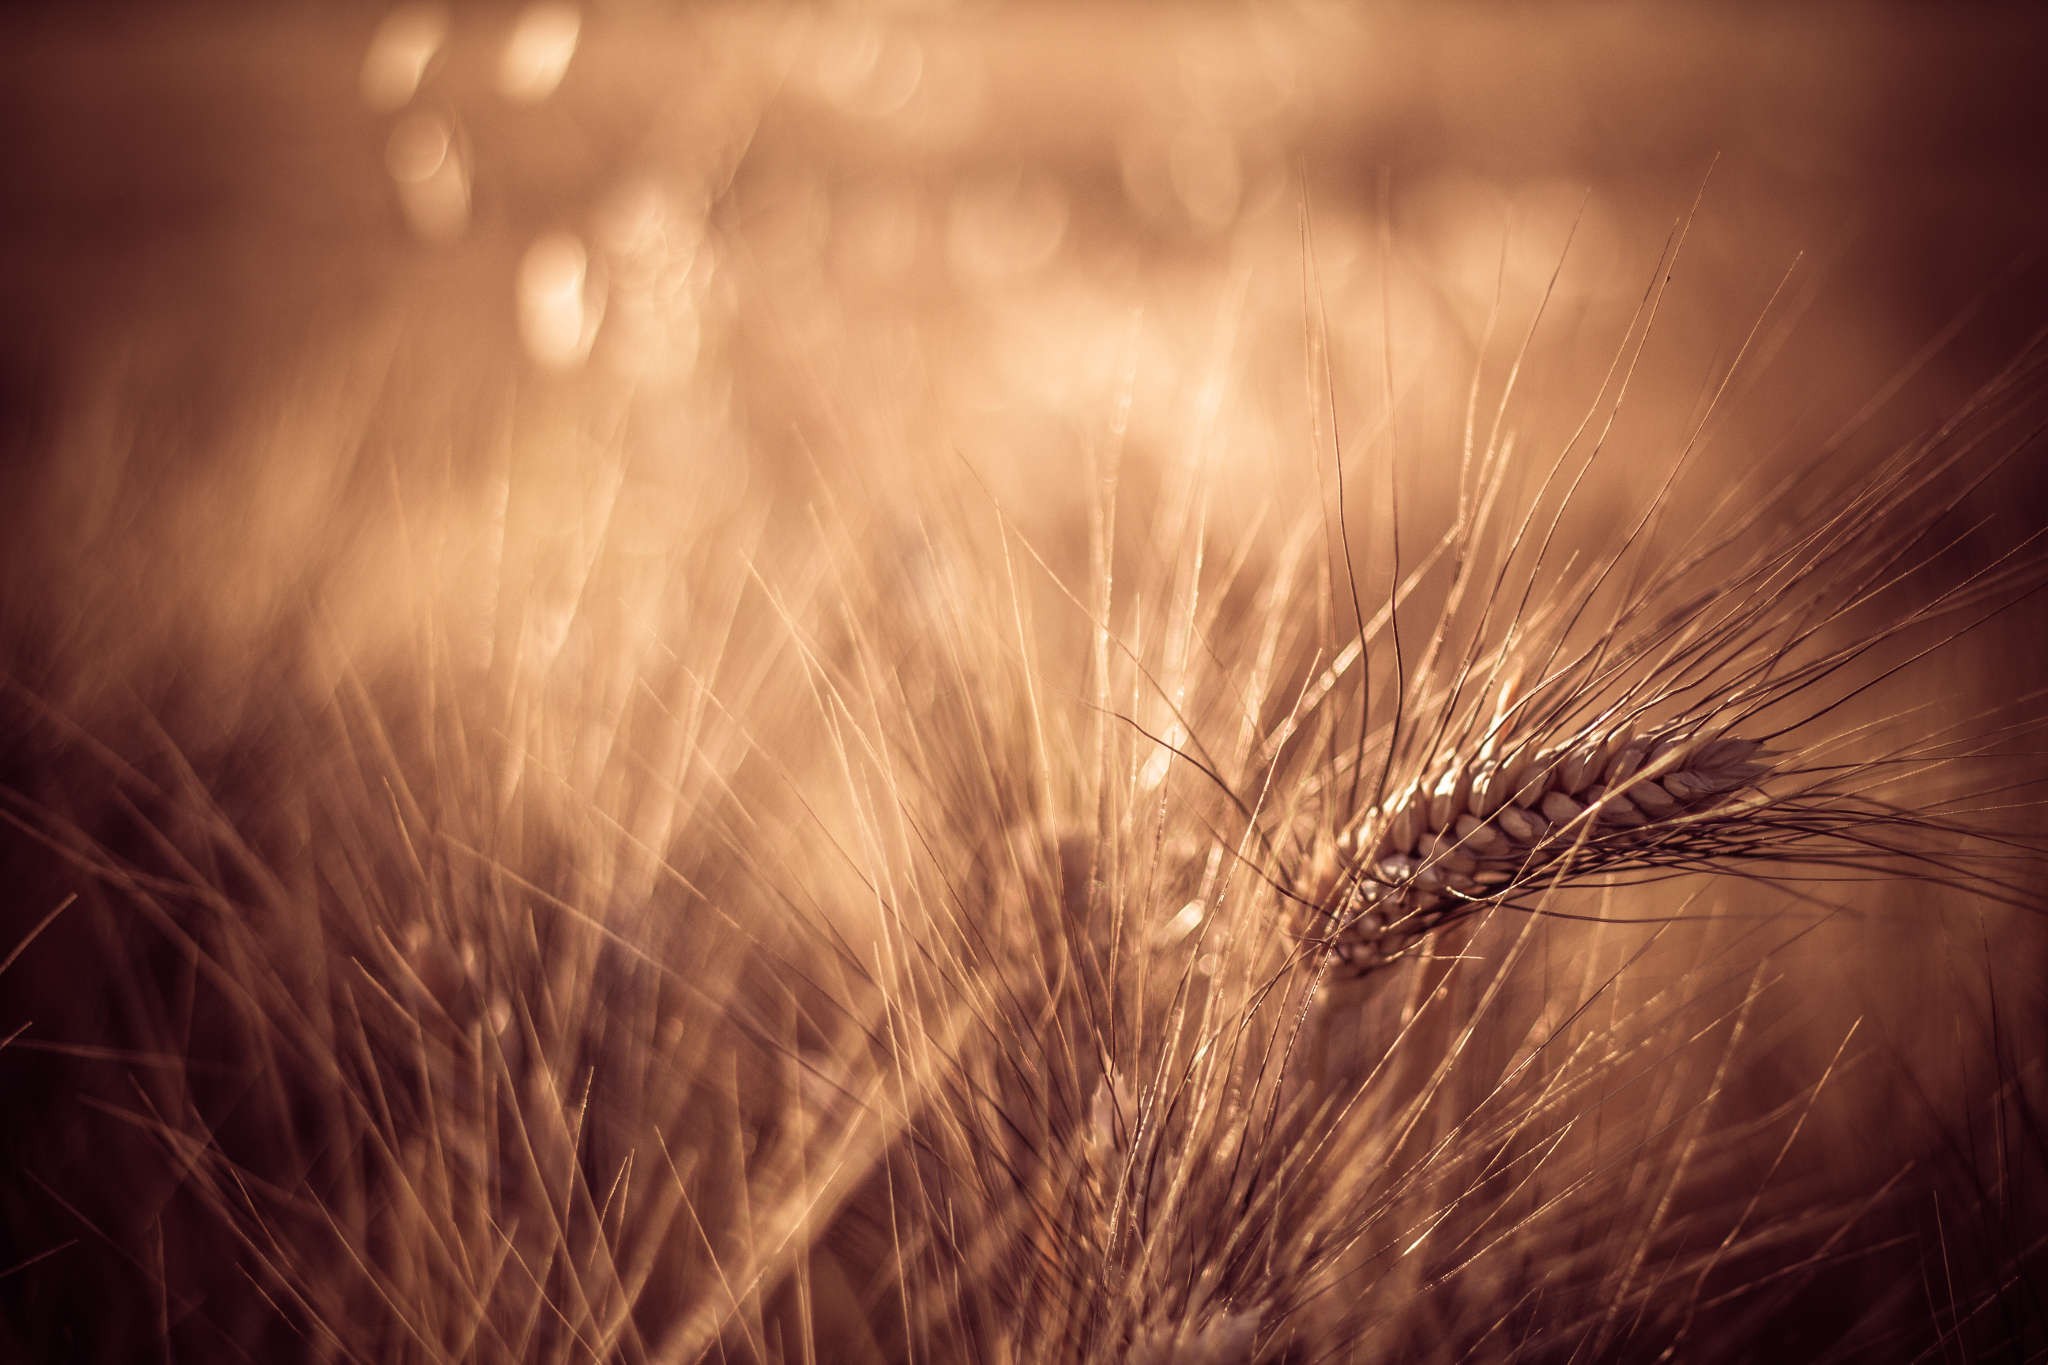 General 2048x1365 nature wheat plants